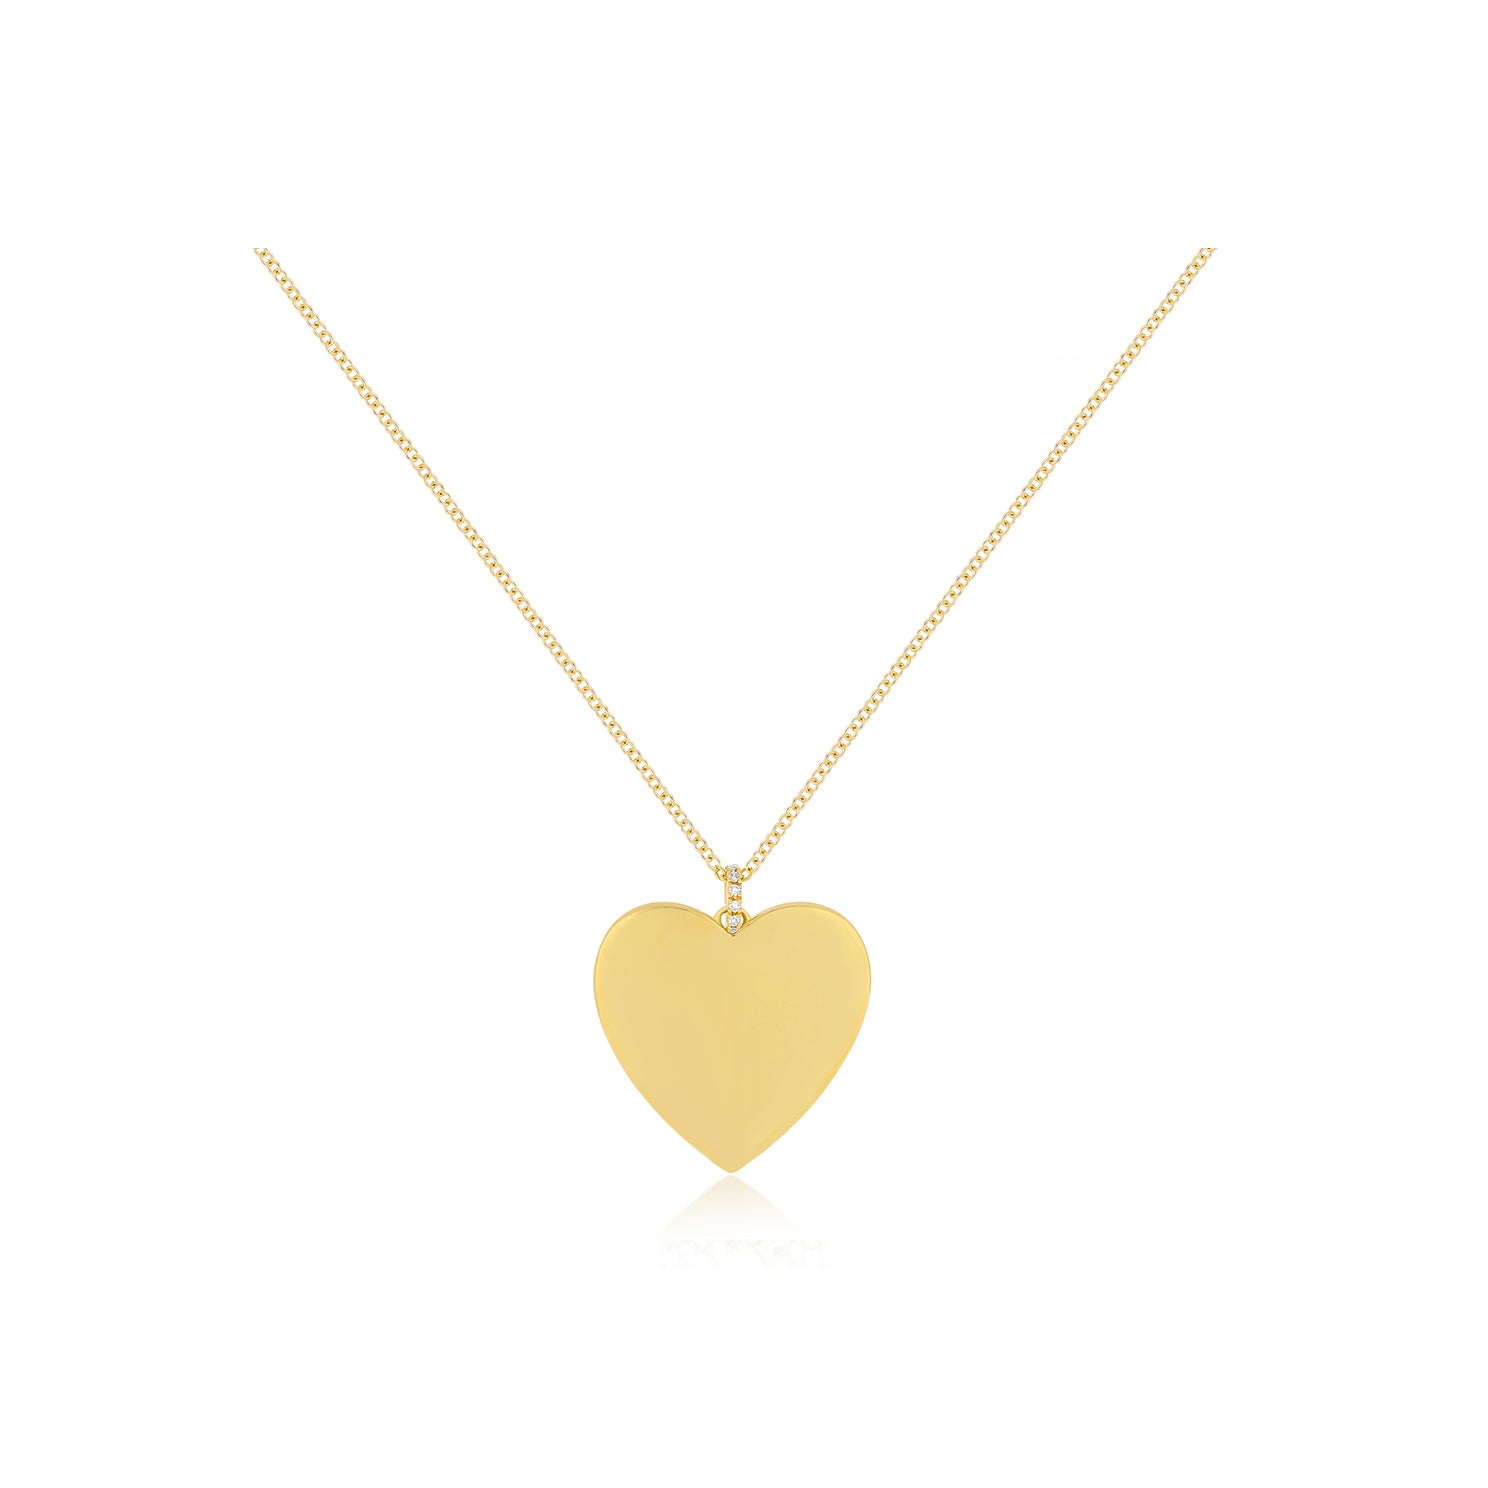 Gold Jumbo Heart Necklace in 14k yellow gold